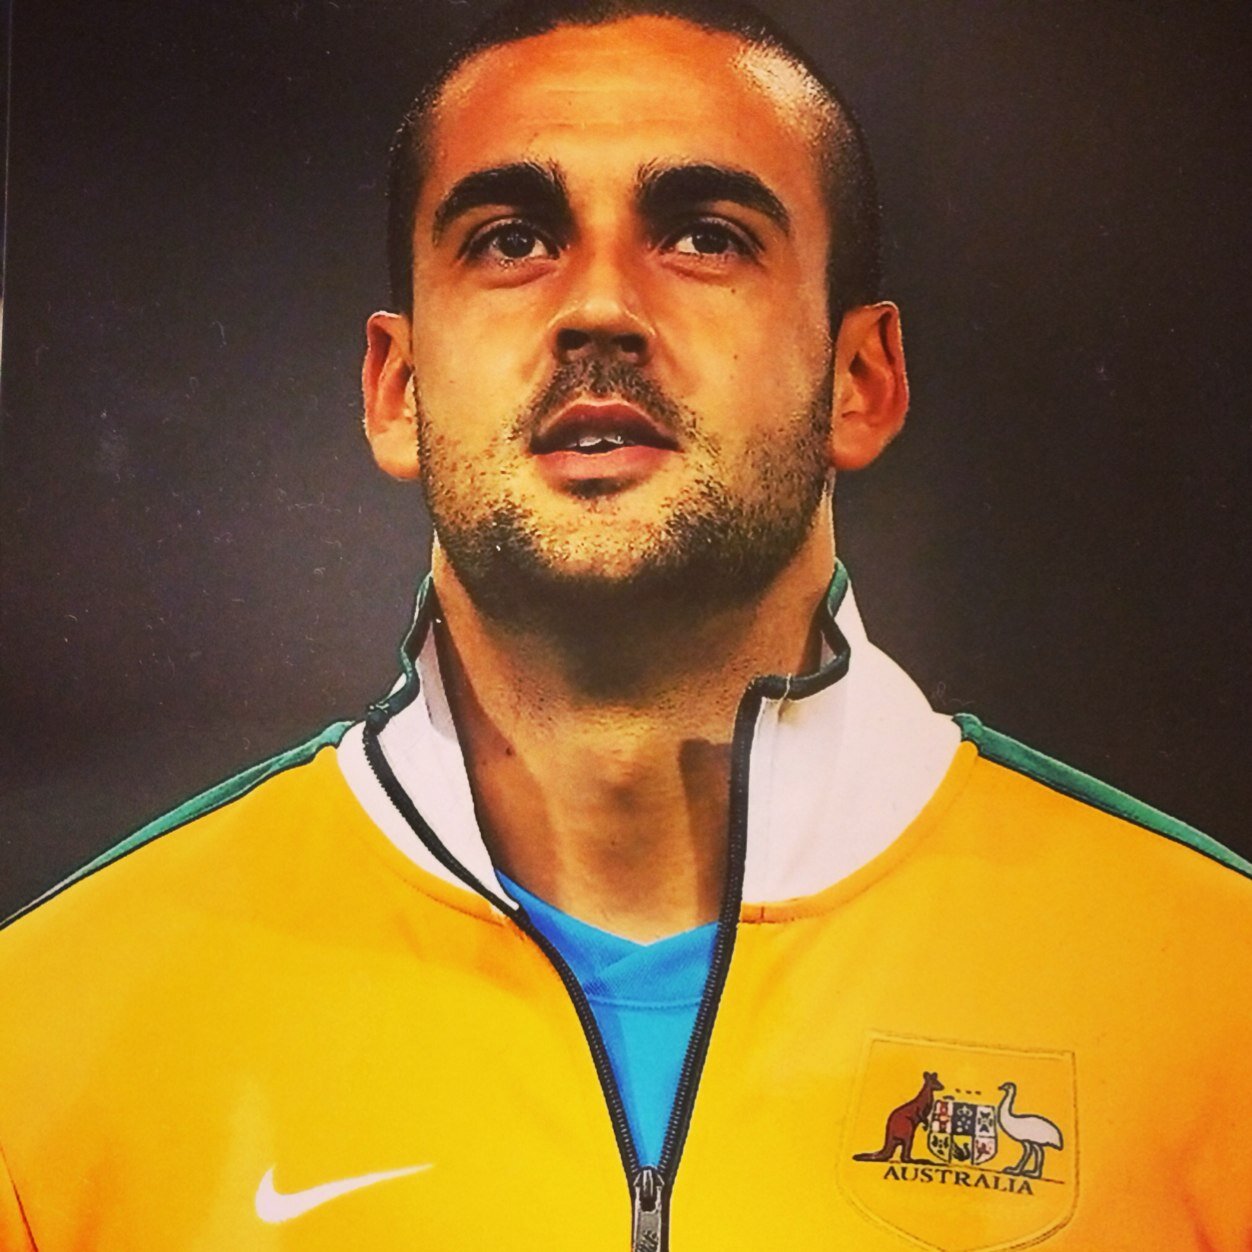 Offical twitter page Aussie keeper ... Instagram @federici32 jervis bay australia